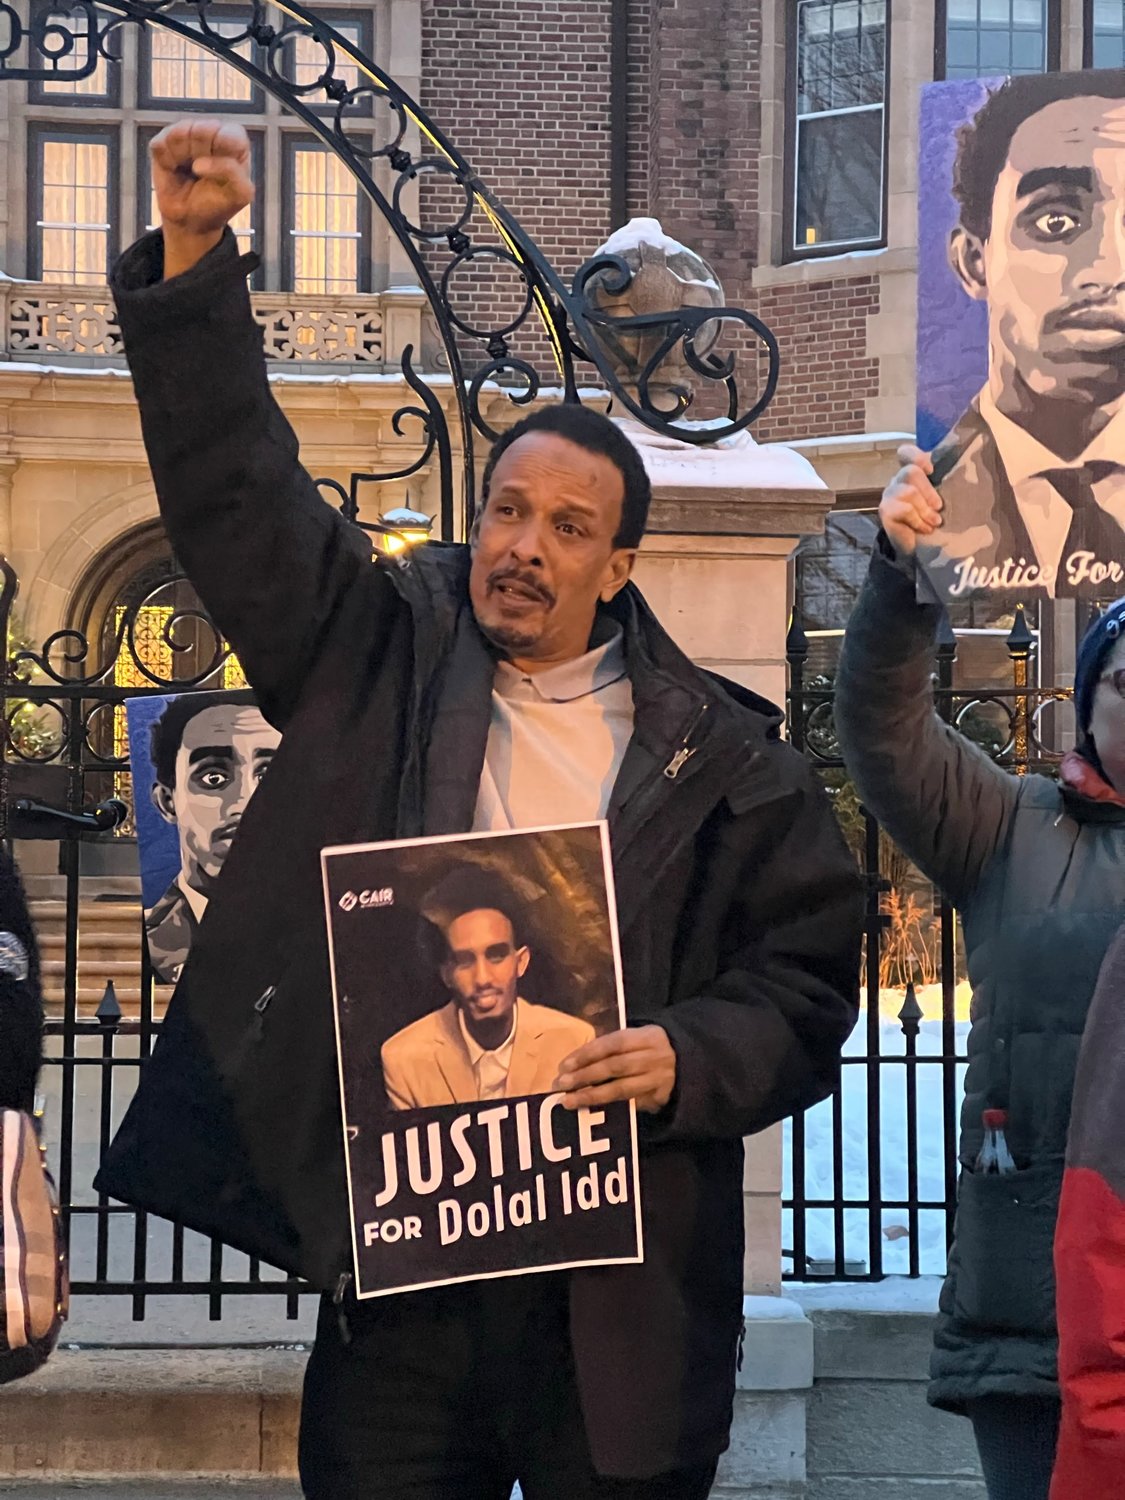 Bayle Gelle, Dolal Idd’s father, raises a fist for justice.